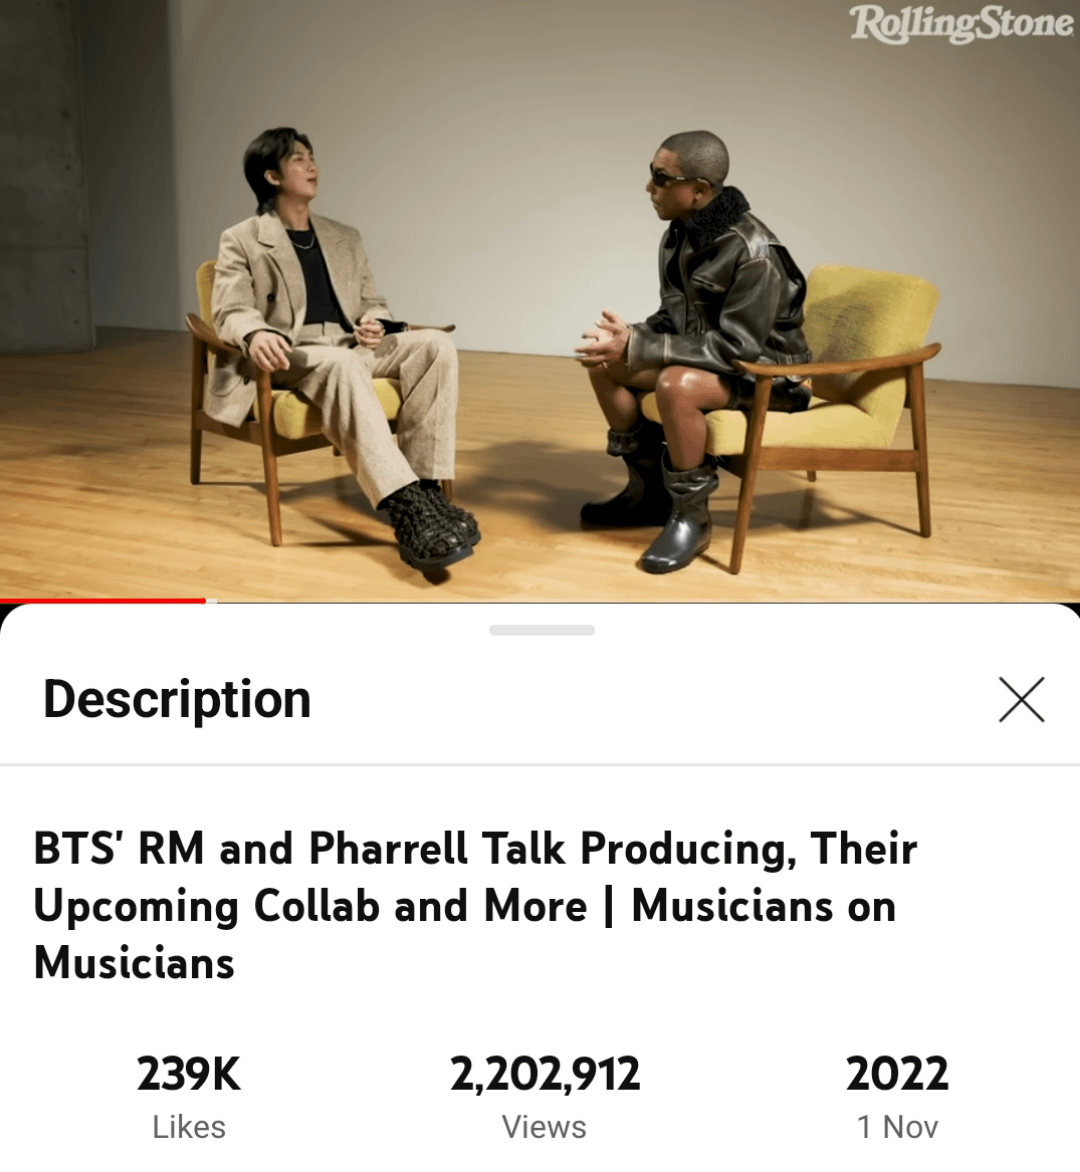 A year ago today, RM had a heart to heart talk with Pharrell [Rolling Stone: BTS' RM and Pharrell Talk Producing, Their Upcoming Collab and More]